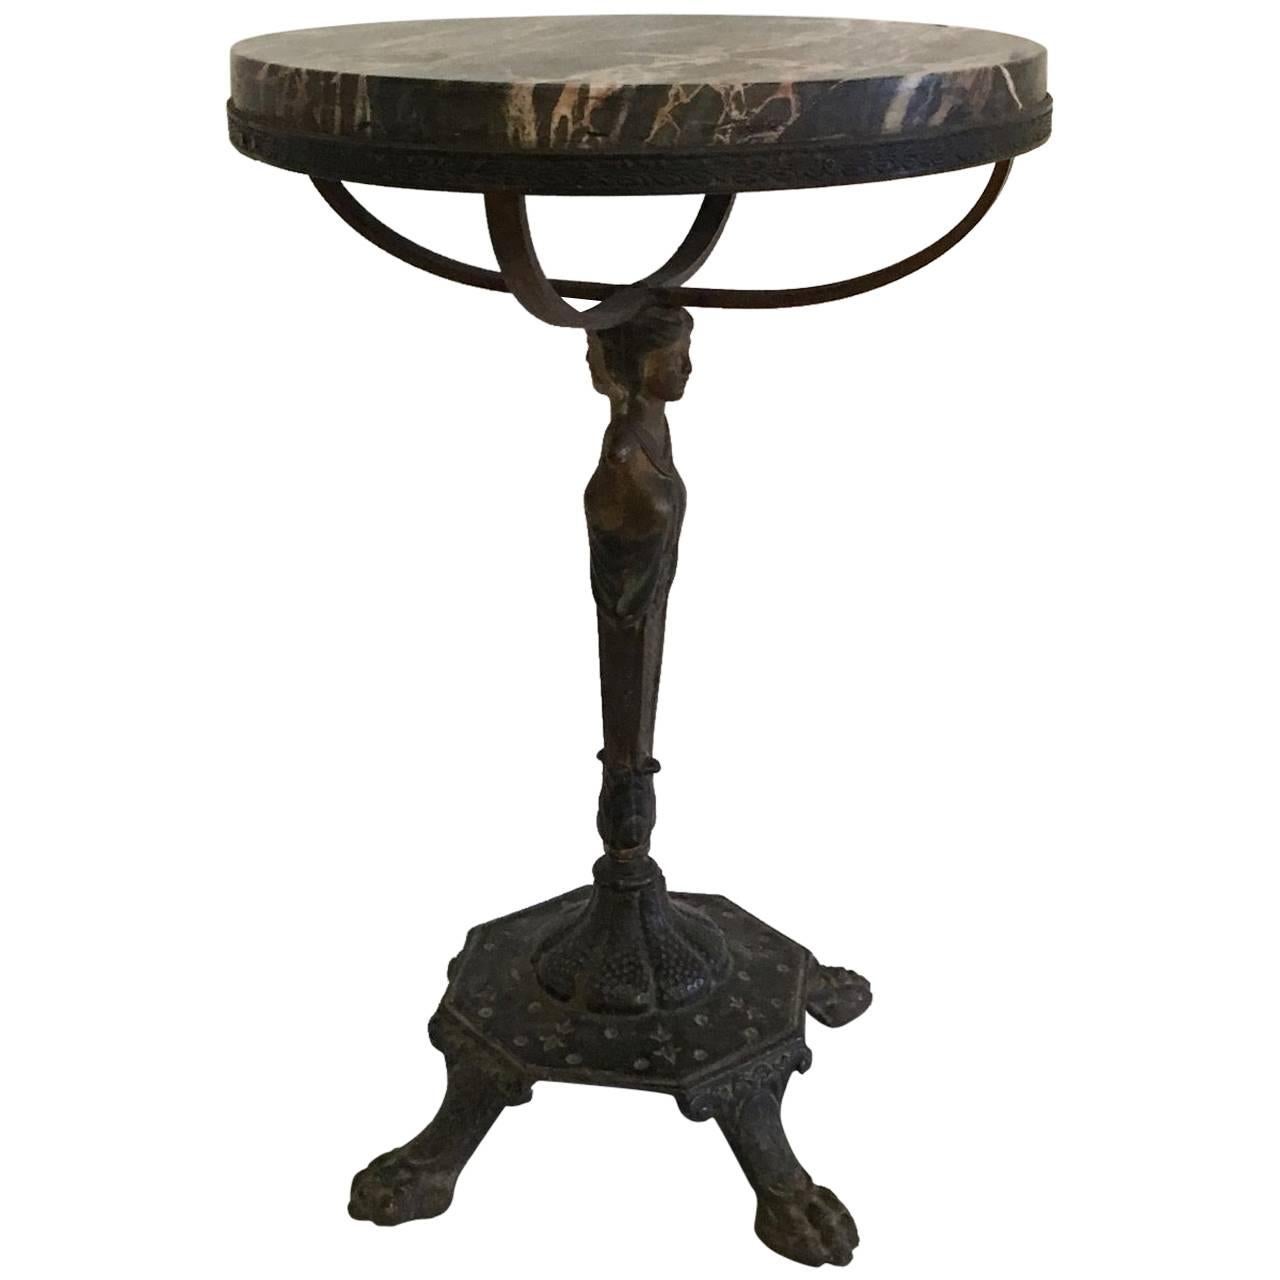 19th Century French Bronze Figural Pedestal Table with Marble Top